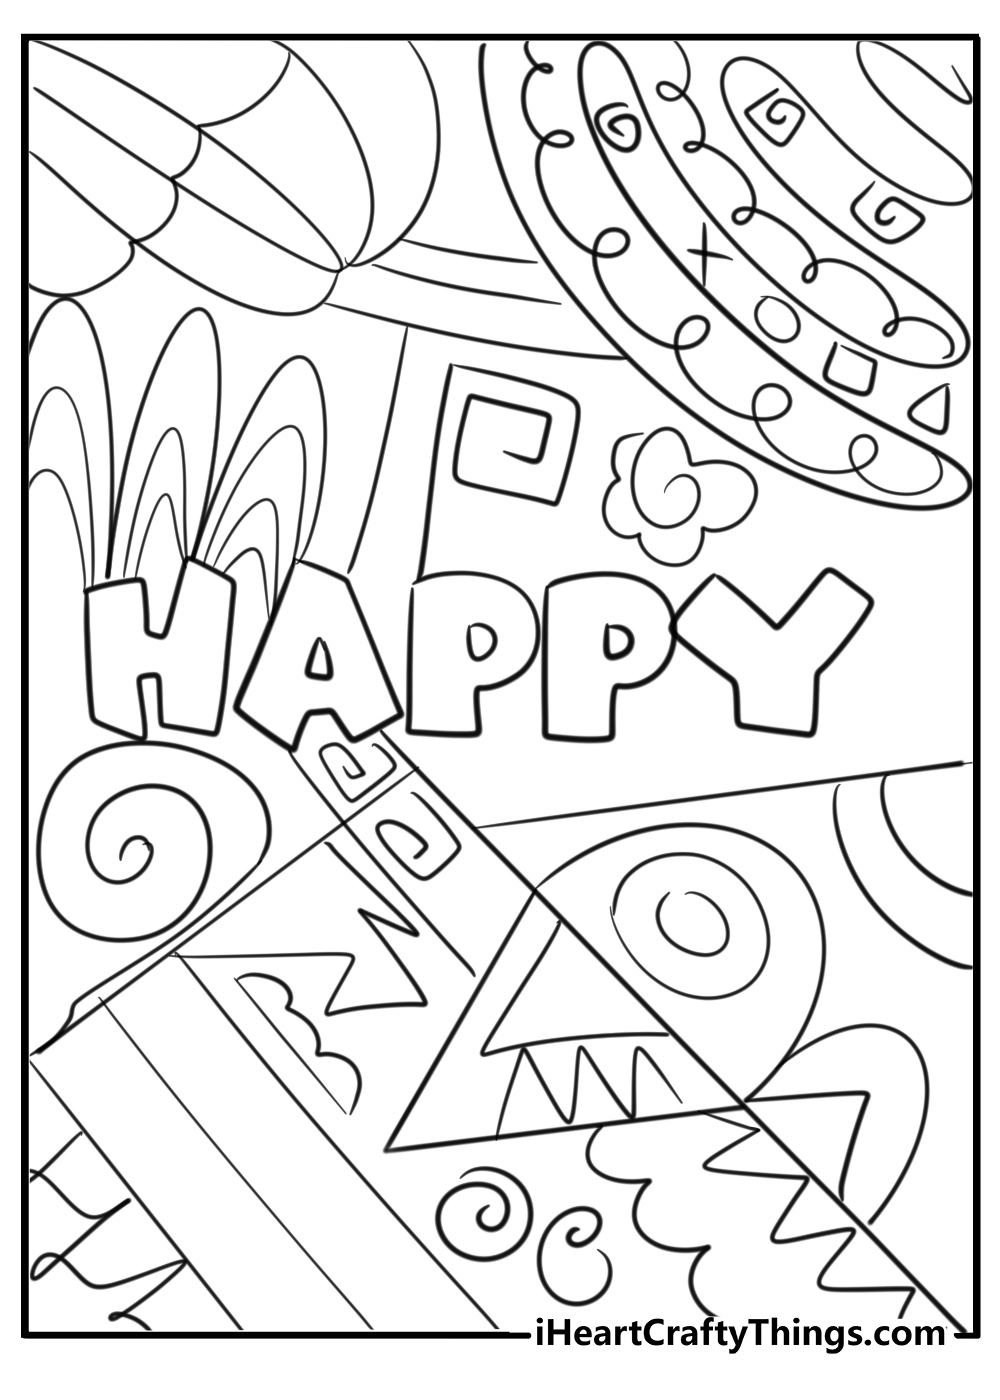 Happy abstract coloring page